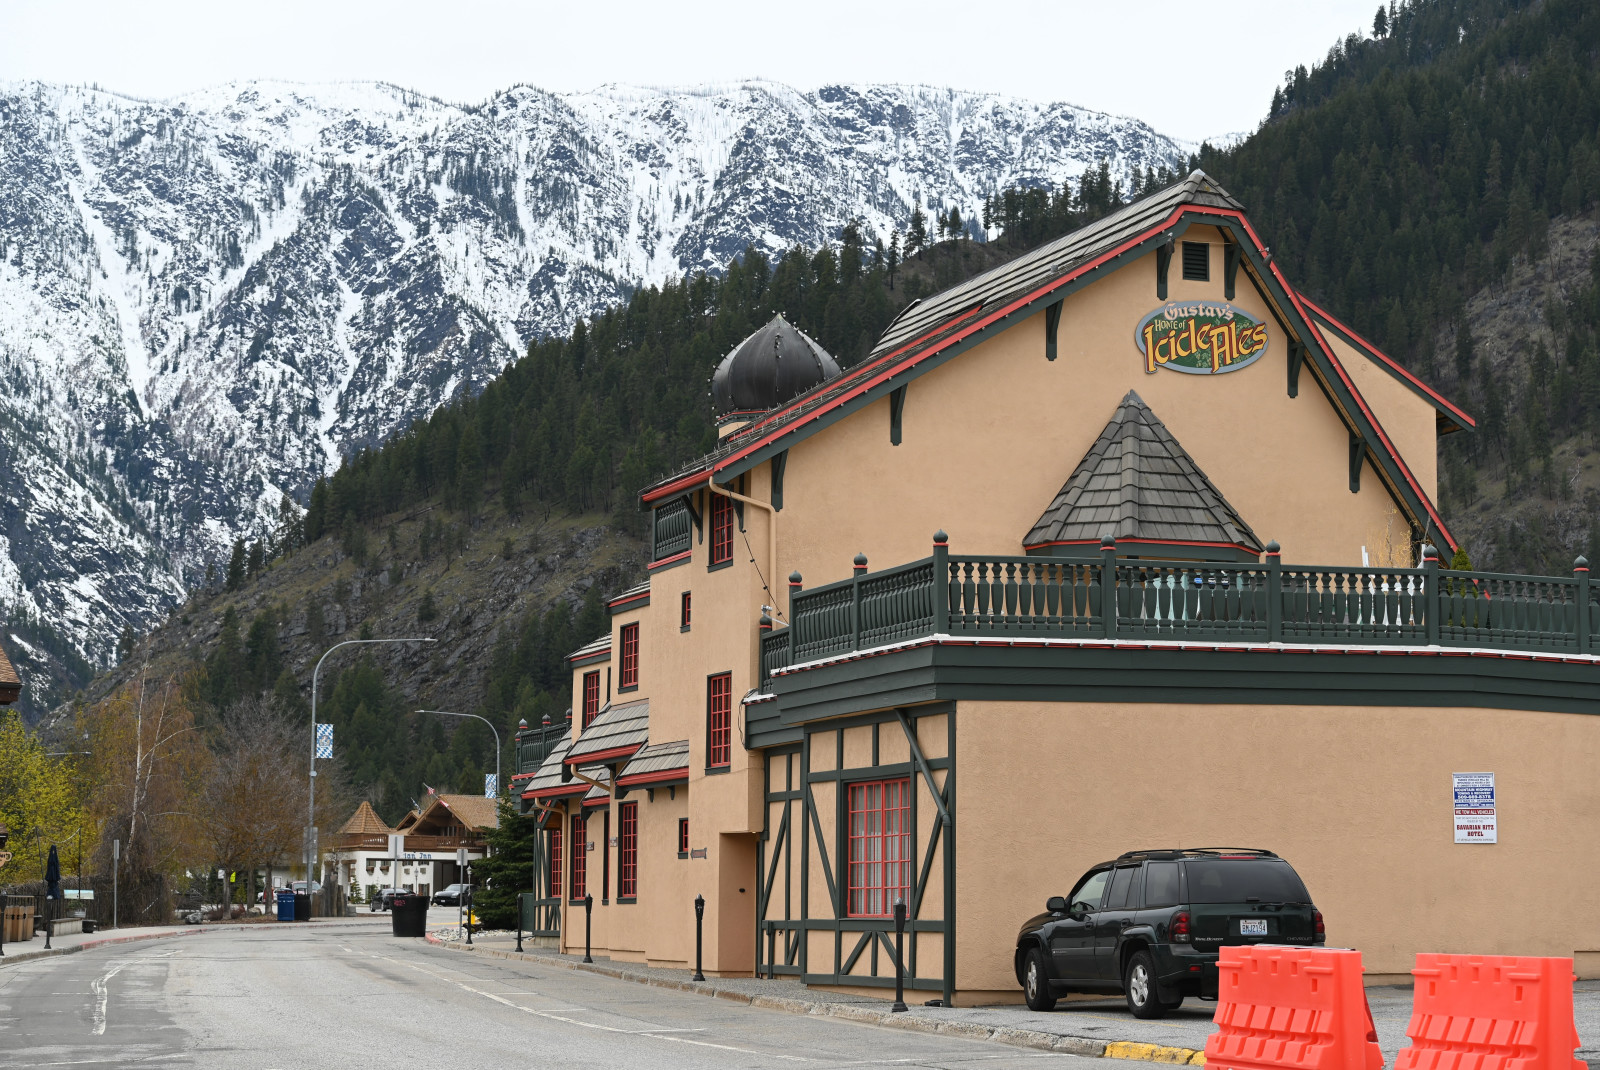 Tan building next to road with trees and snowy mountains in background